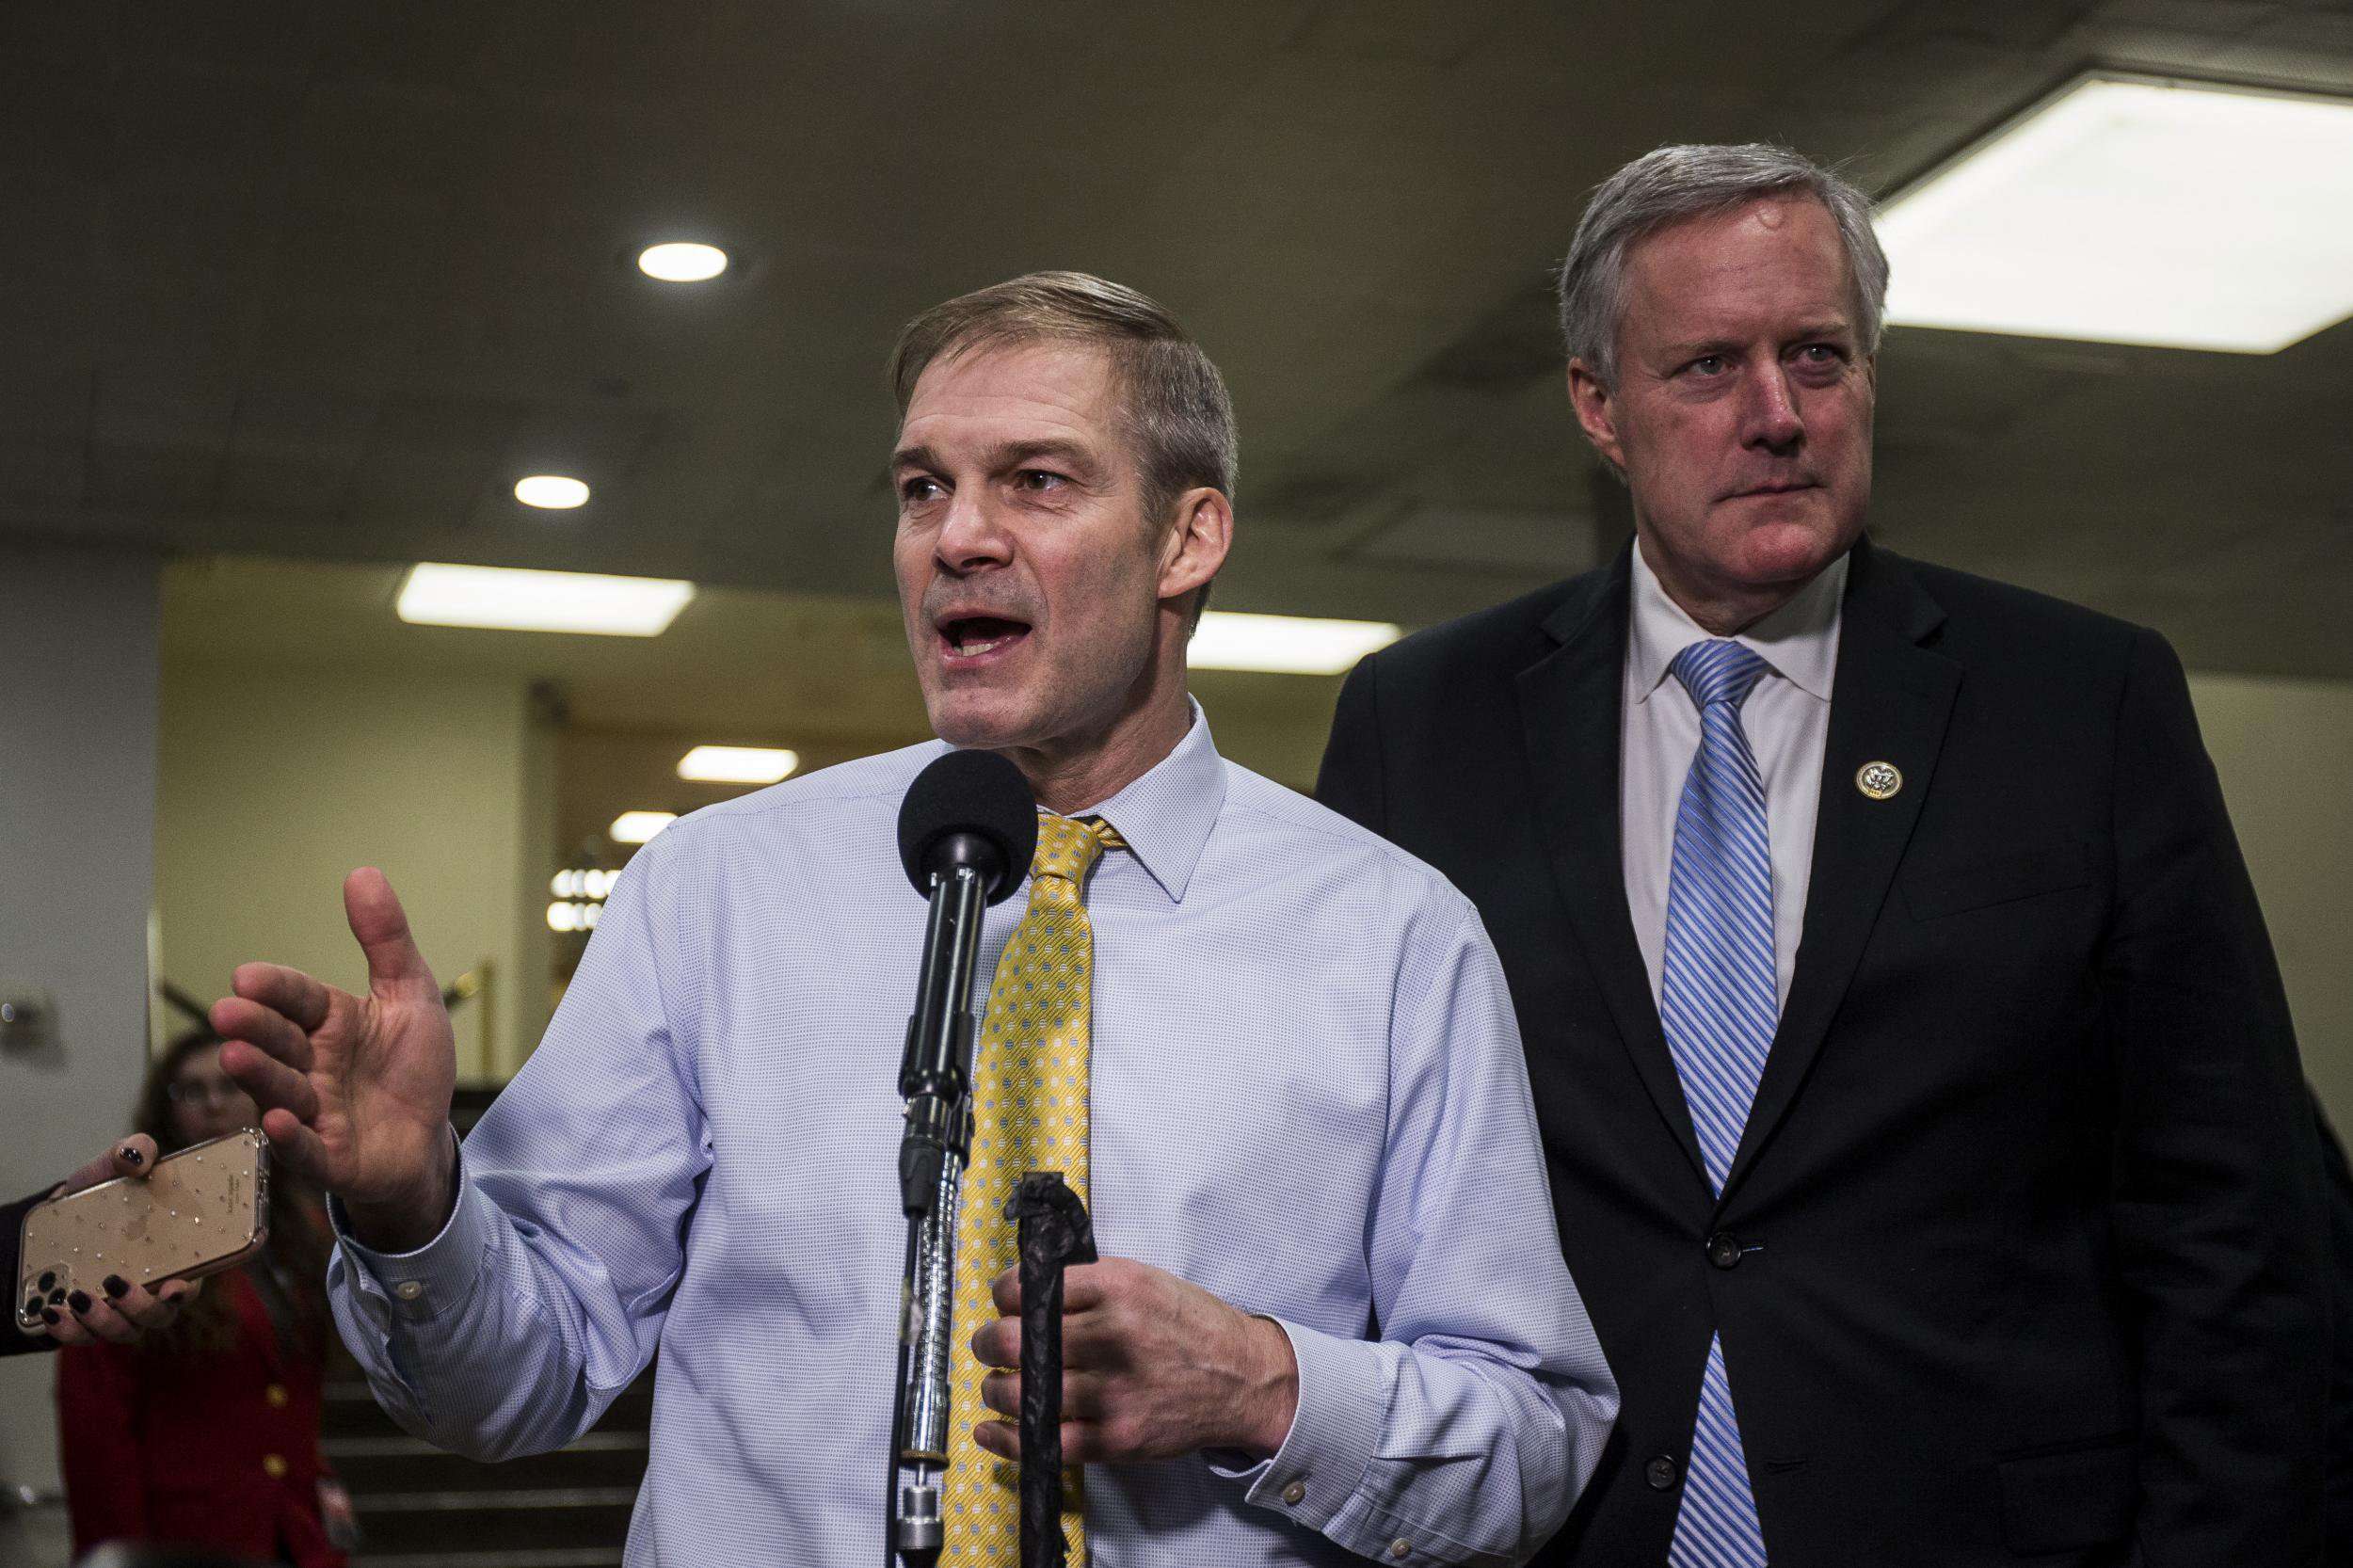 image for Jim Jordan: Key Trump ally was 'crying and begging' student wrestler to deny abuse cover-up, hearing told